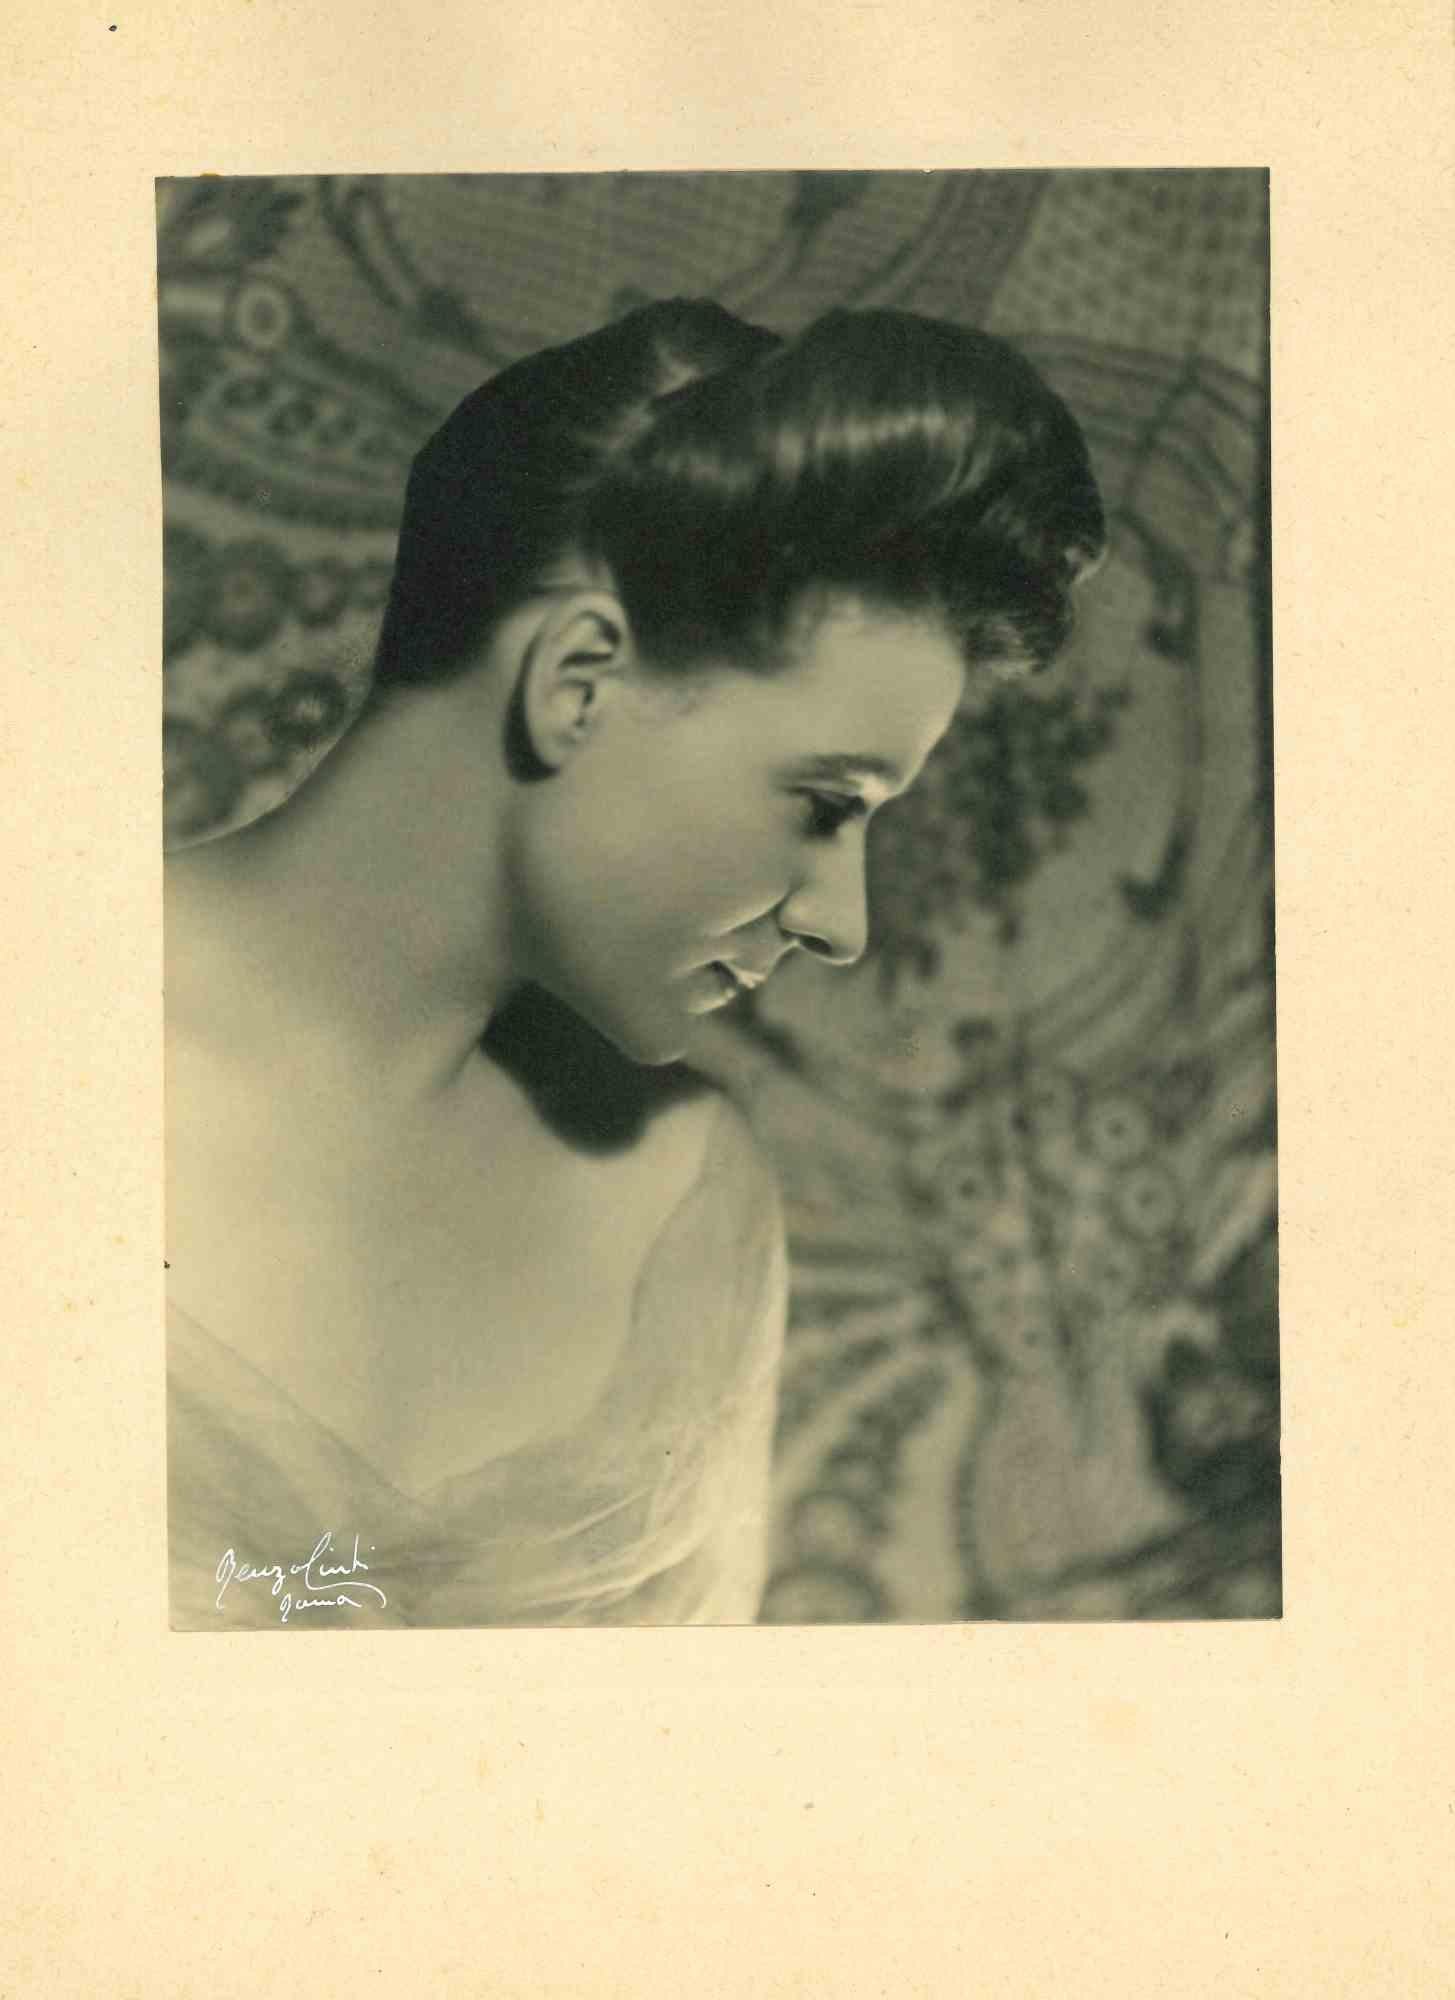 Portrait of Mrs Gilles is a  Photograph realized by Renzo Cinti in 1940s.

